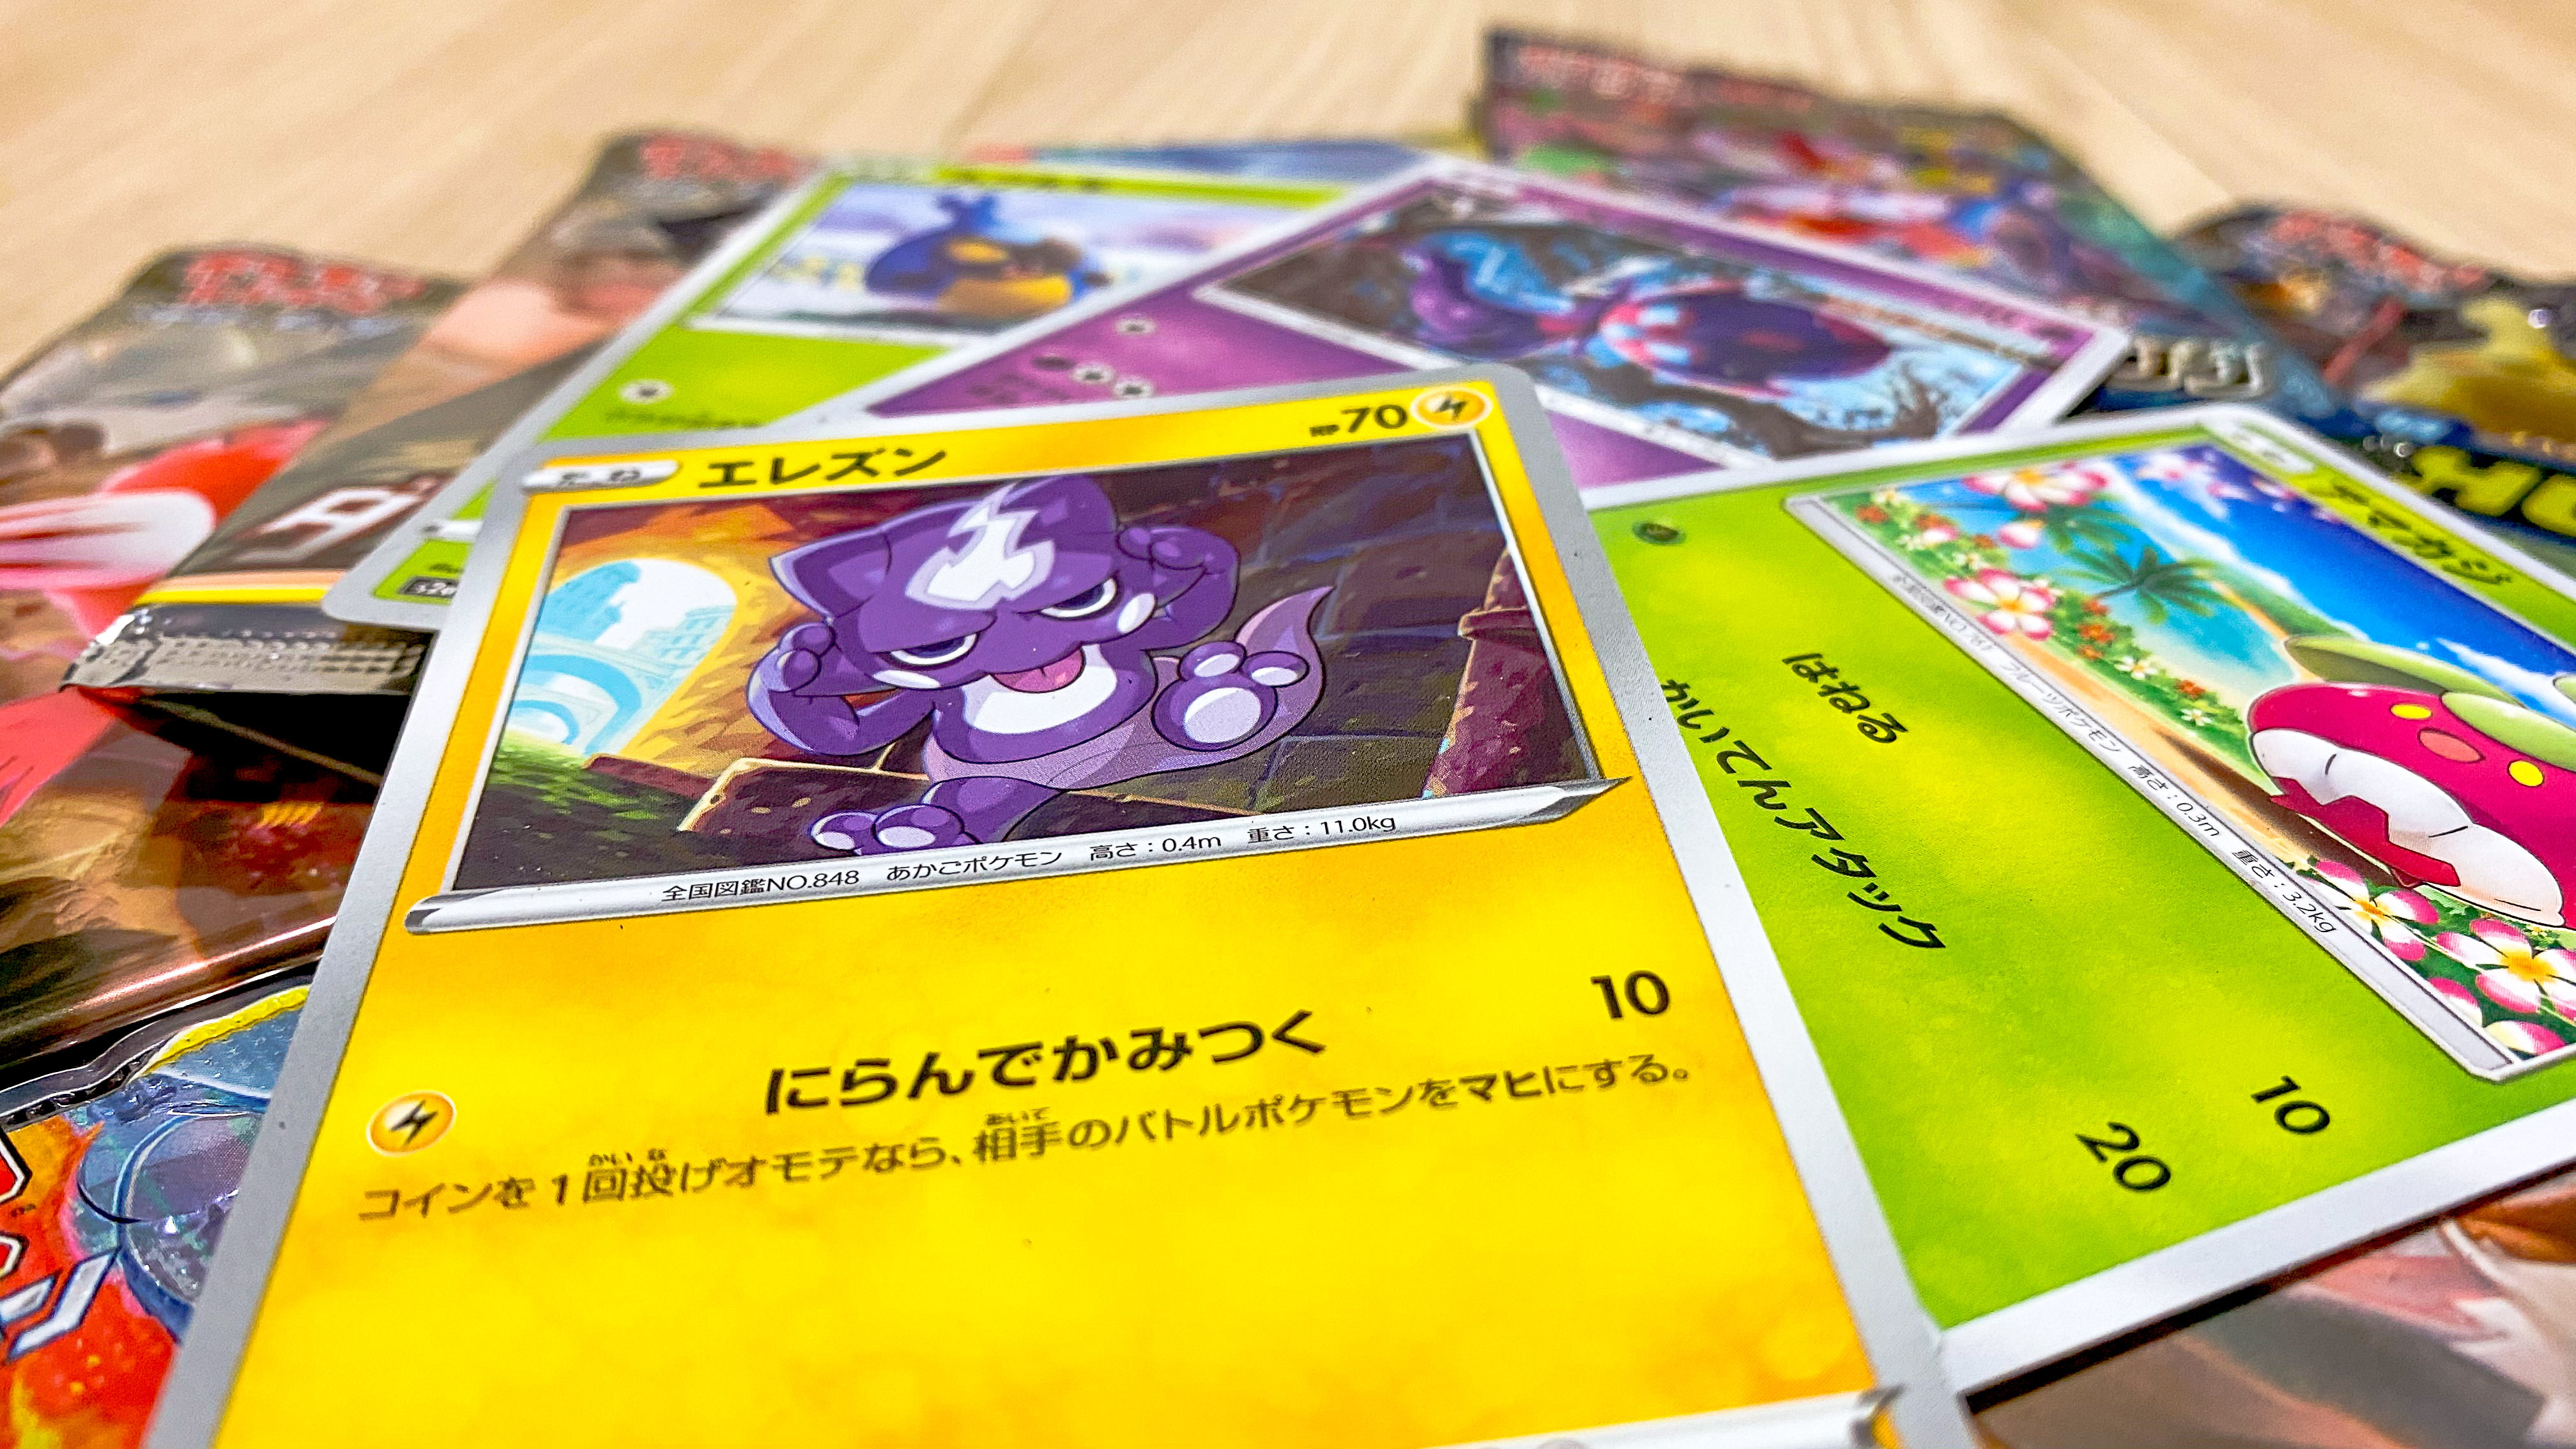 Two Men in Japan Have Been Arrested for Stealing Over US0K in Pokémon Cards